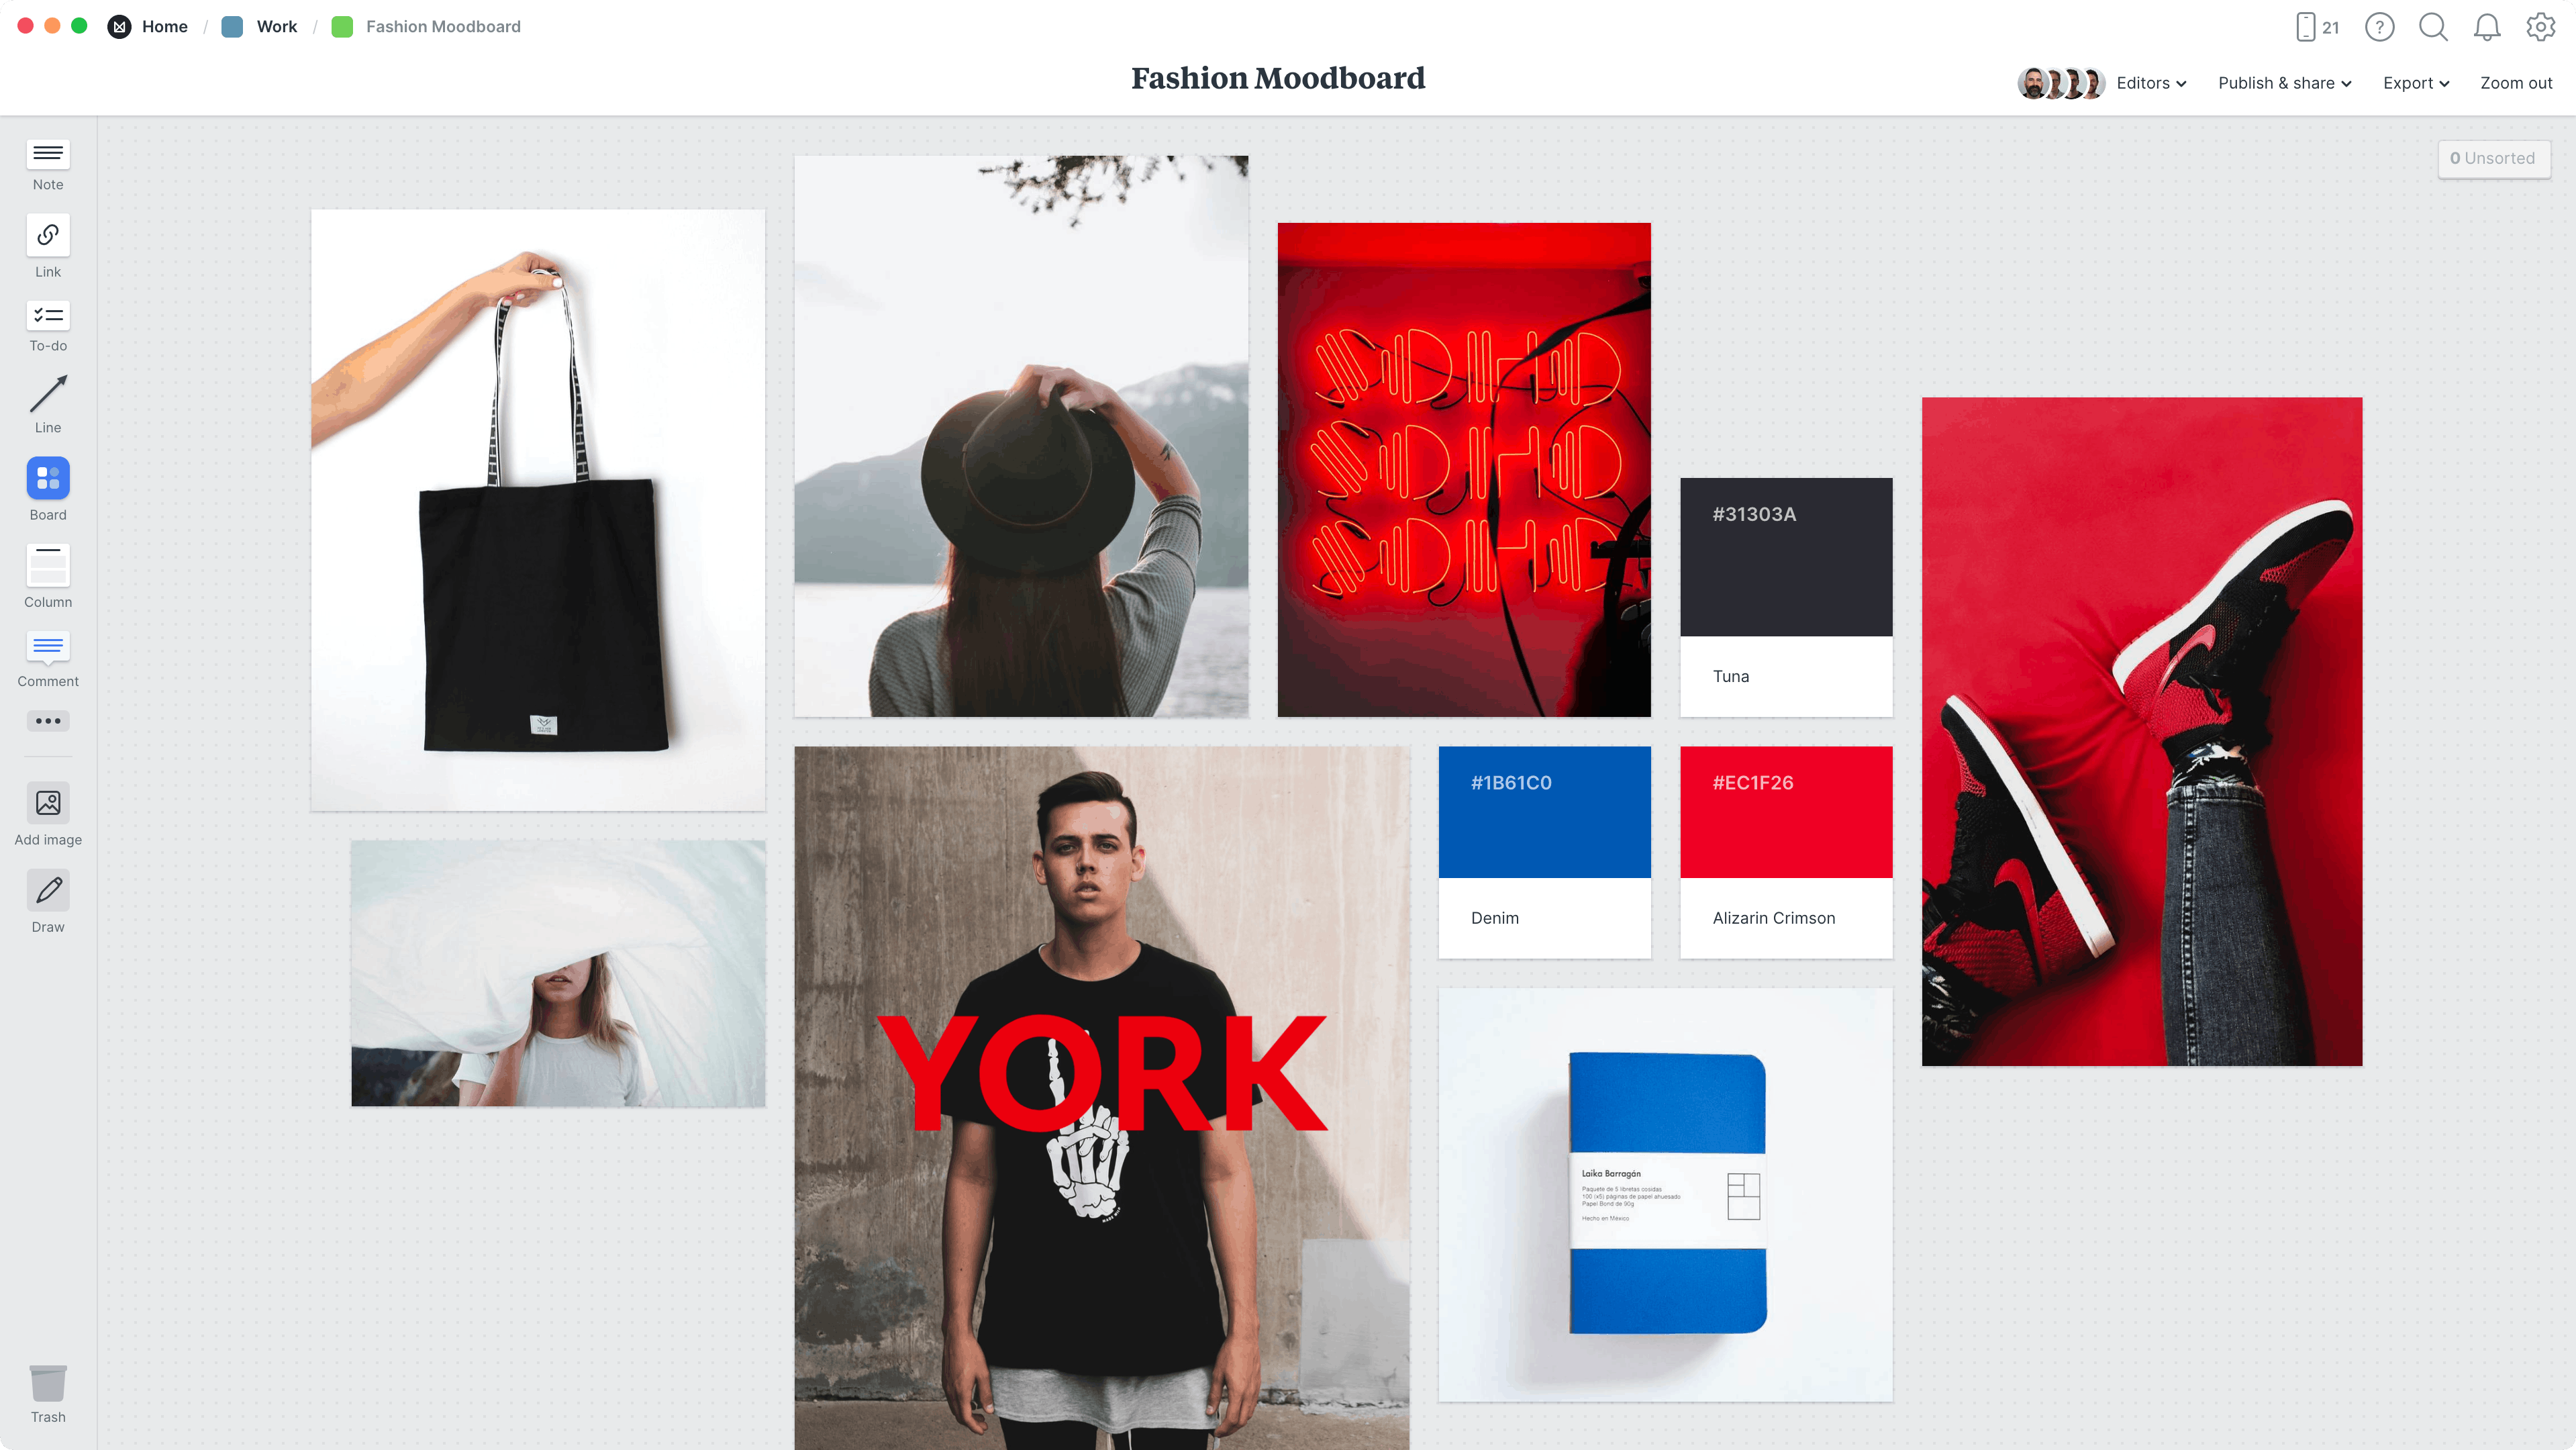 Fashion Moodboard Template, within the Milanote app